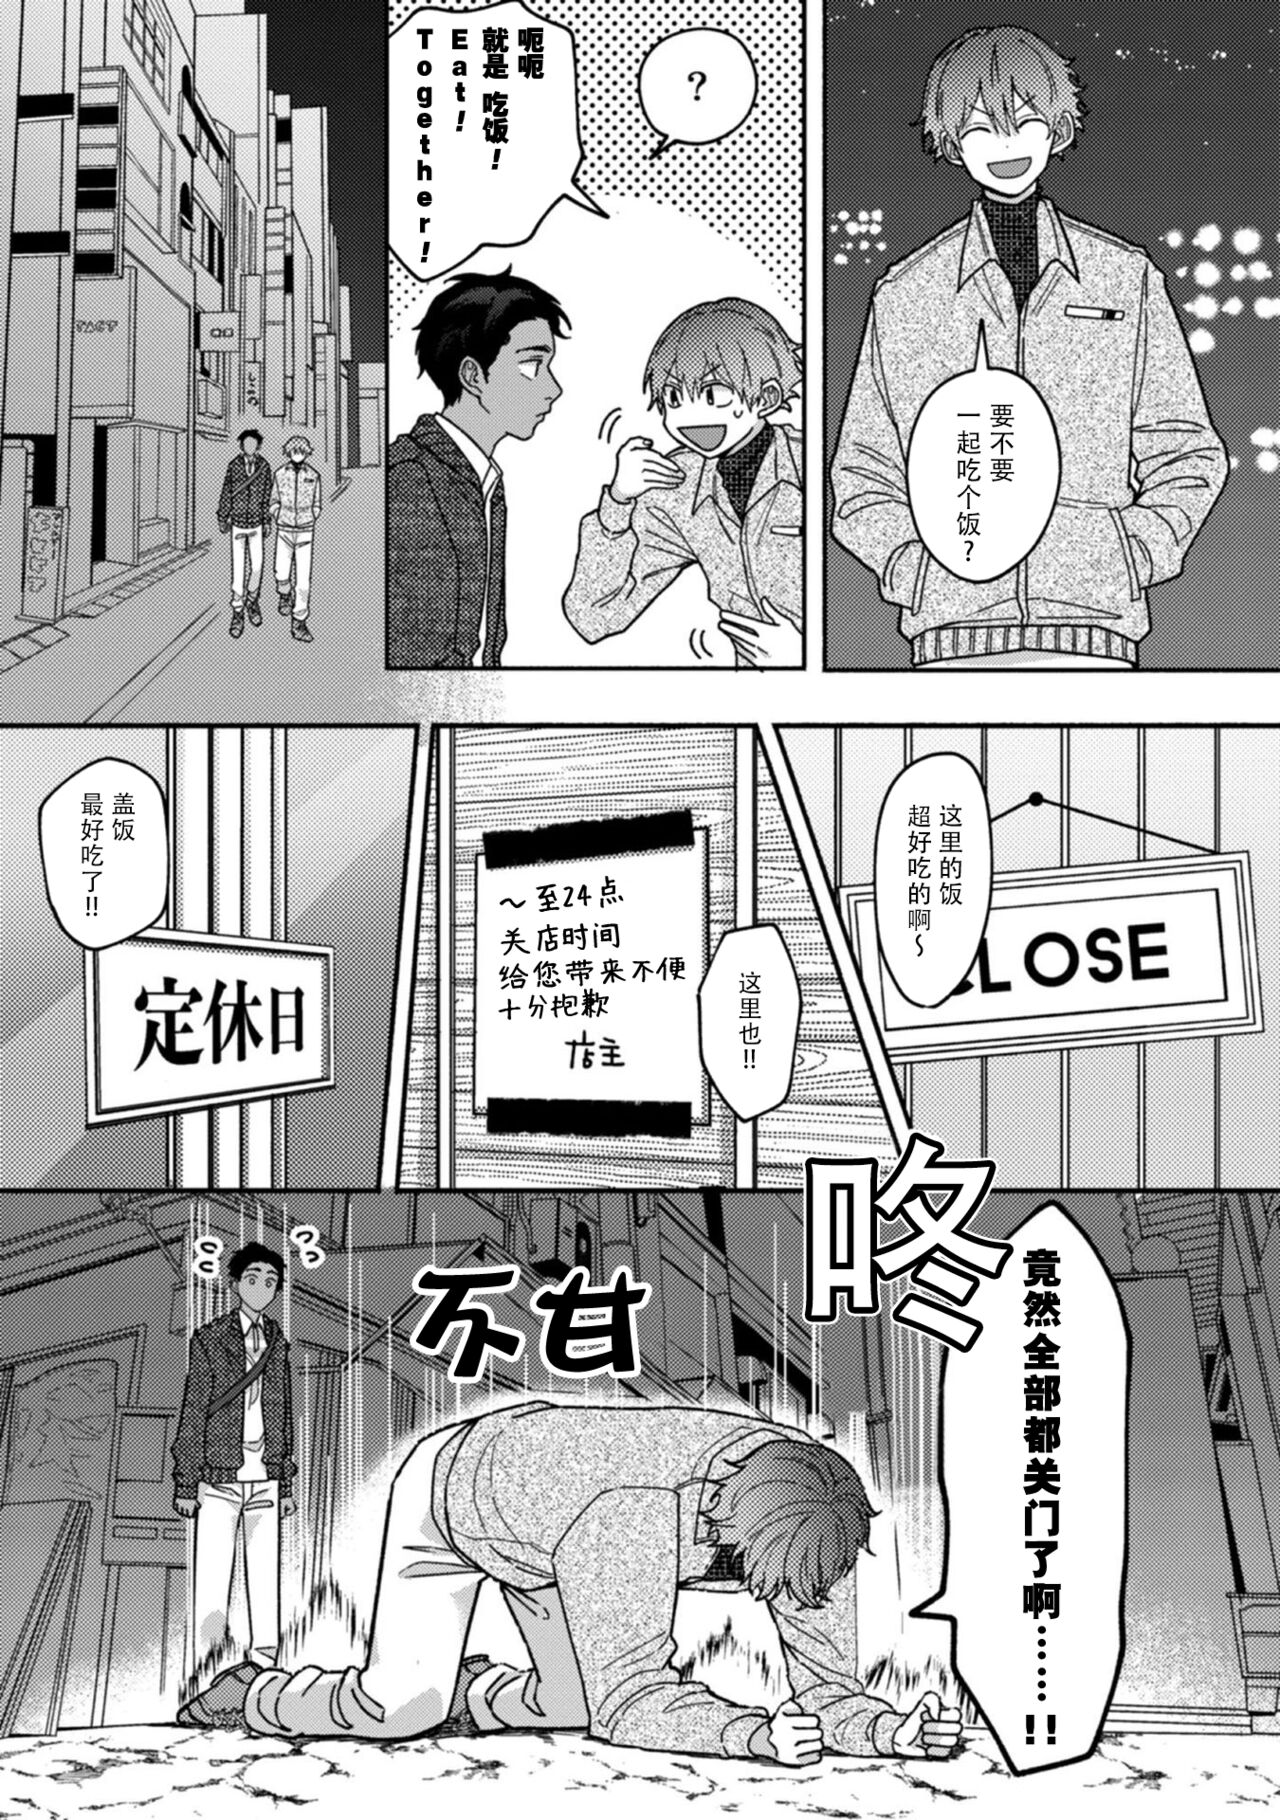 (Sui You Bi)Lies and Yellowknife 1[谎言与黄色小刀 第一话][Chinese][看海汉化组] (水曜日)嘘とイエローナイフ 1